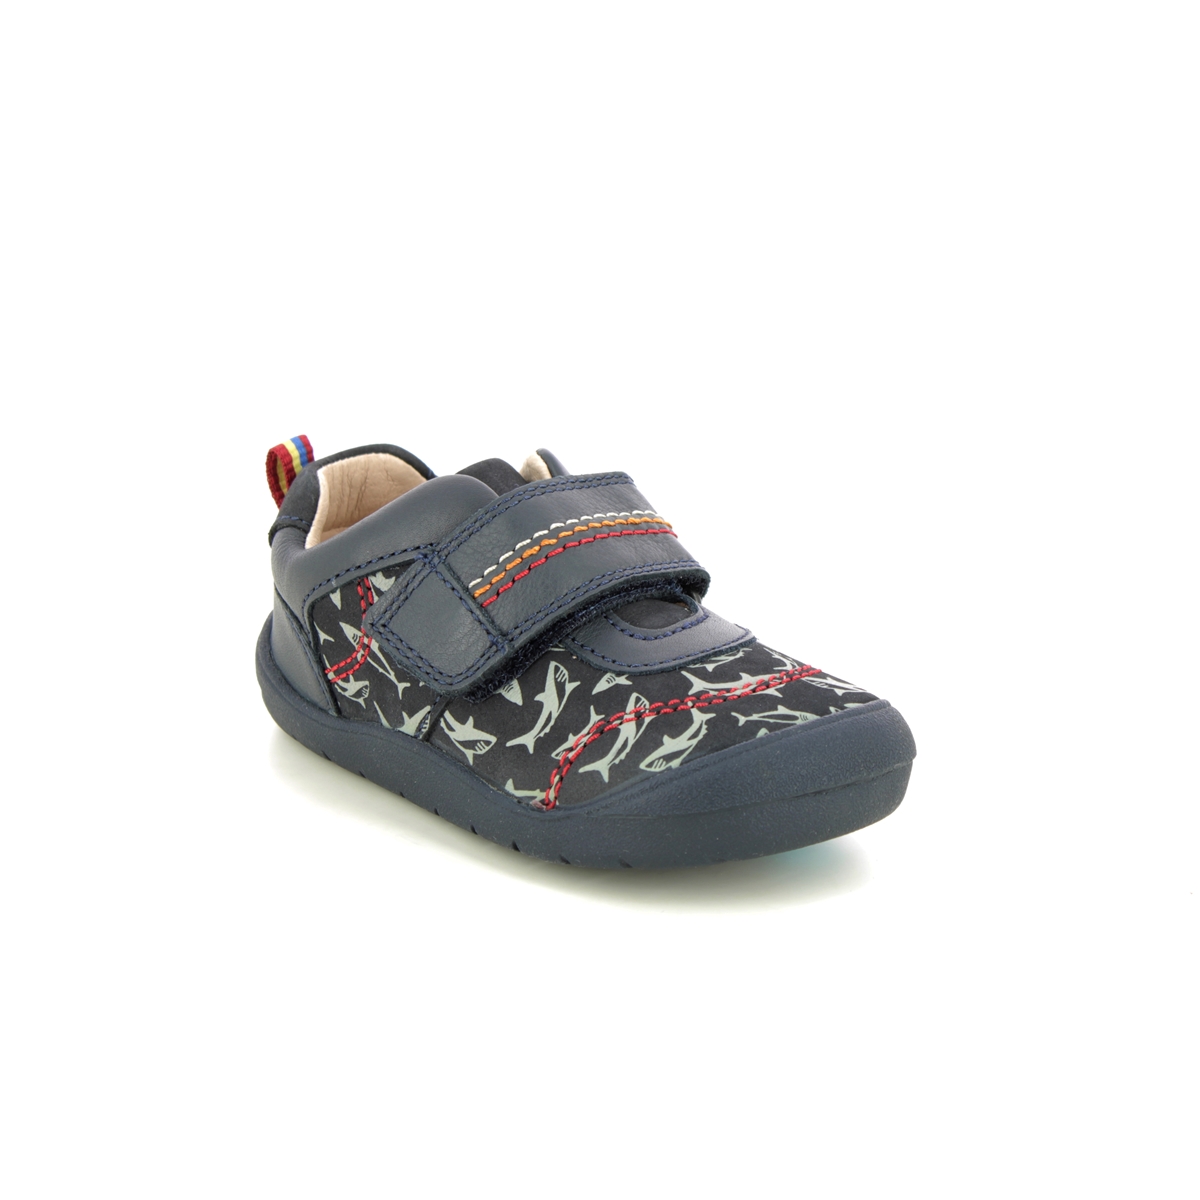 Start Rite - Jaws In Navy Nubuck 0782-96F In Size 4.5 In Plain Navy Nubuck Boys First And Toddler Shoes  In Navy Nubuck For kids